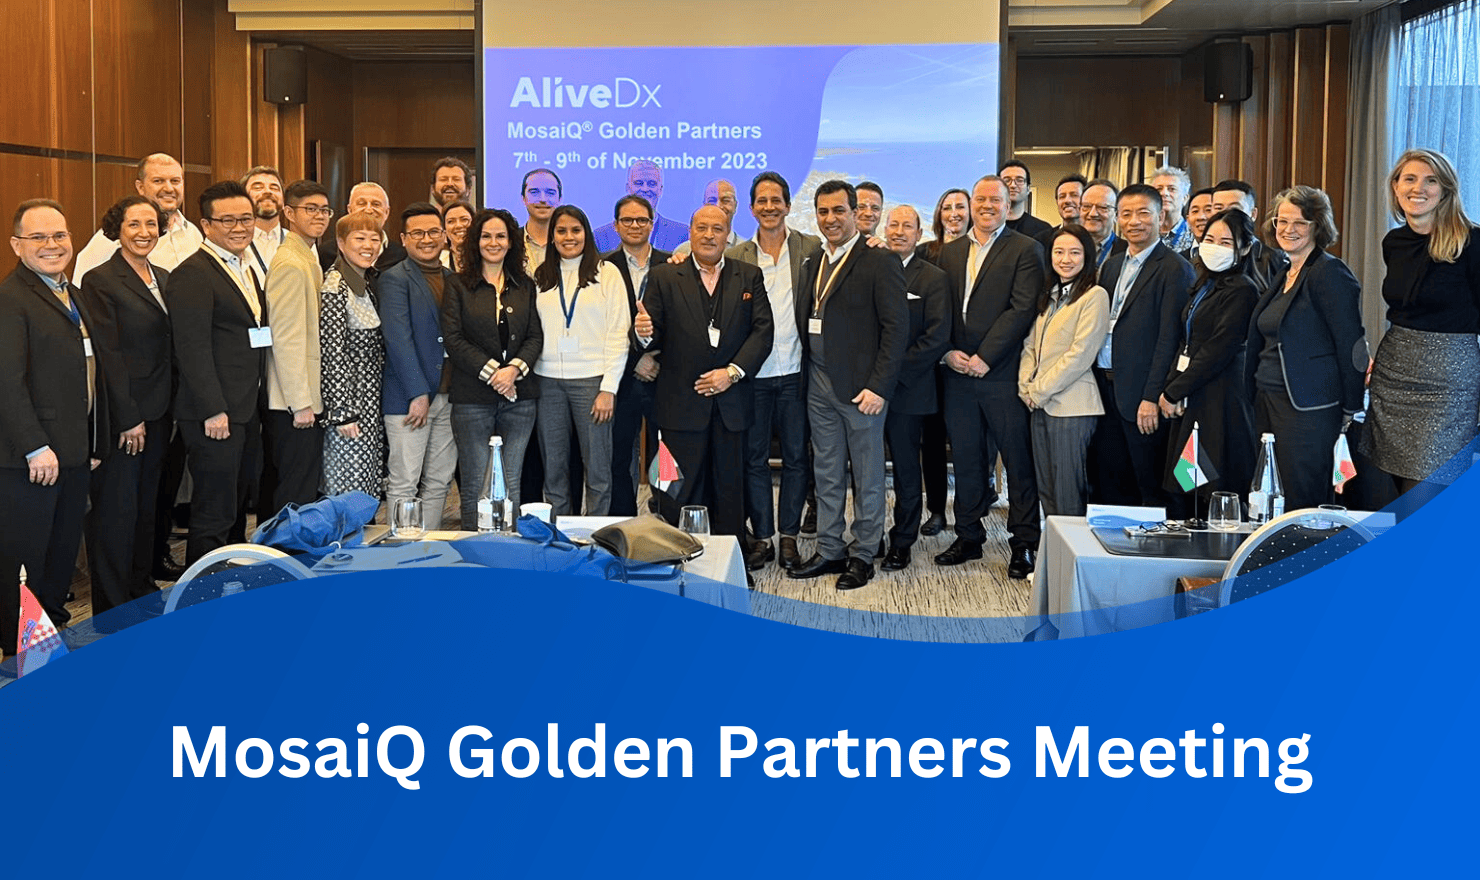 AliveDx held its first Golden Partners Meeting